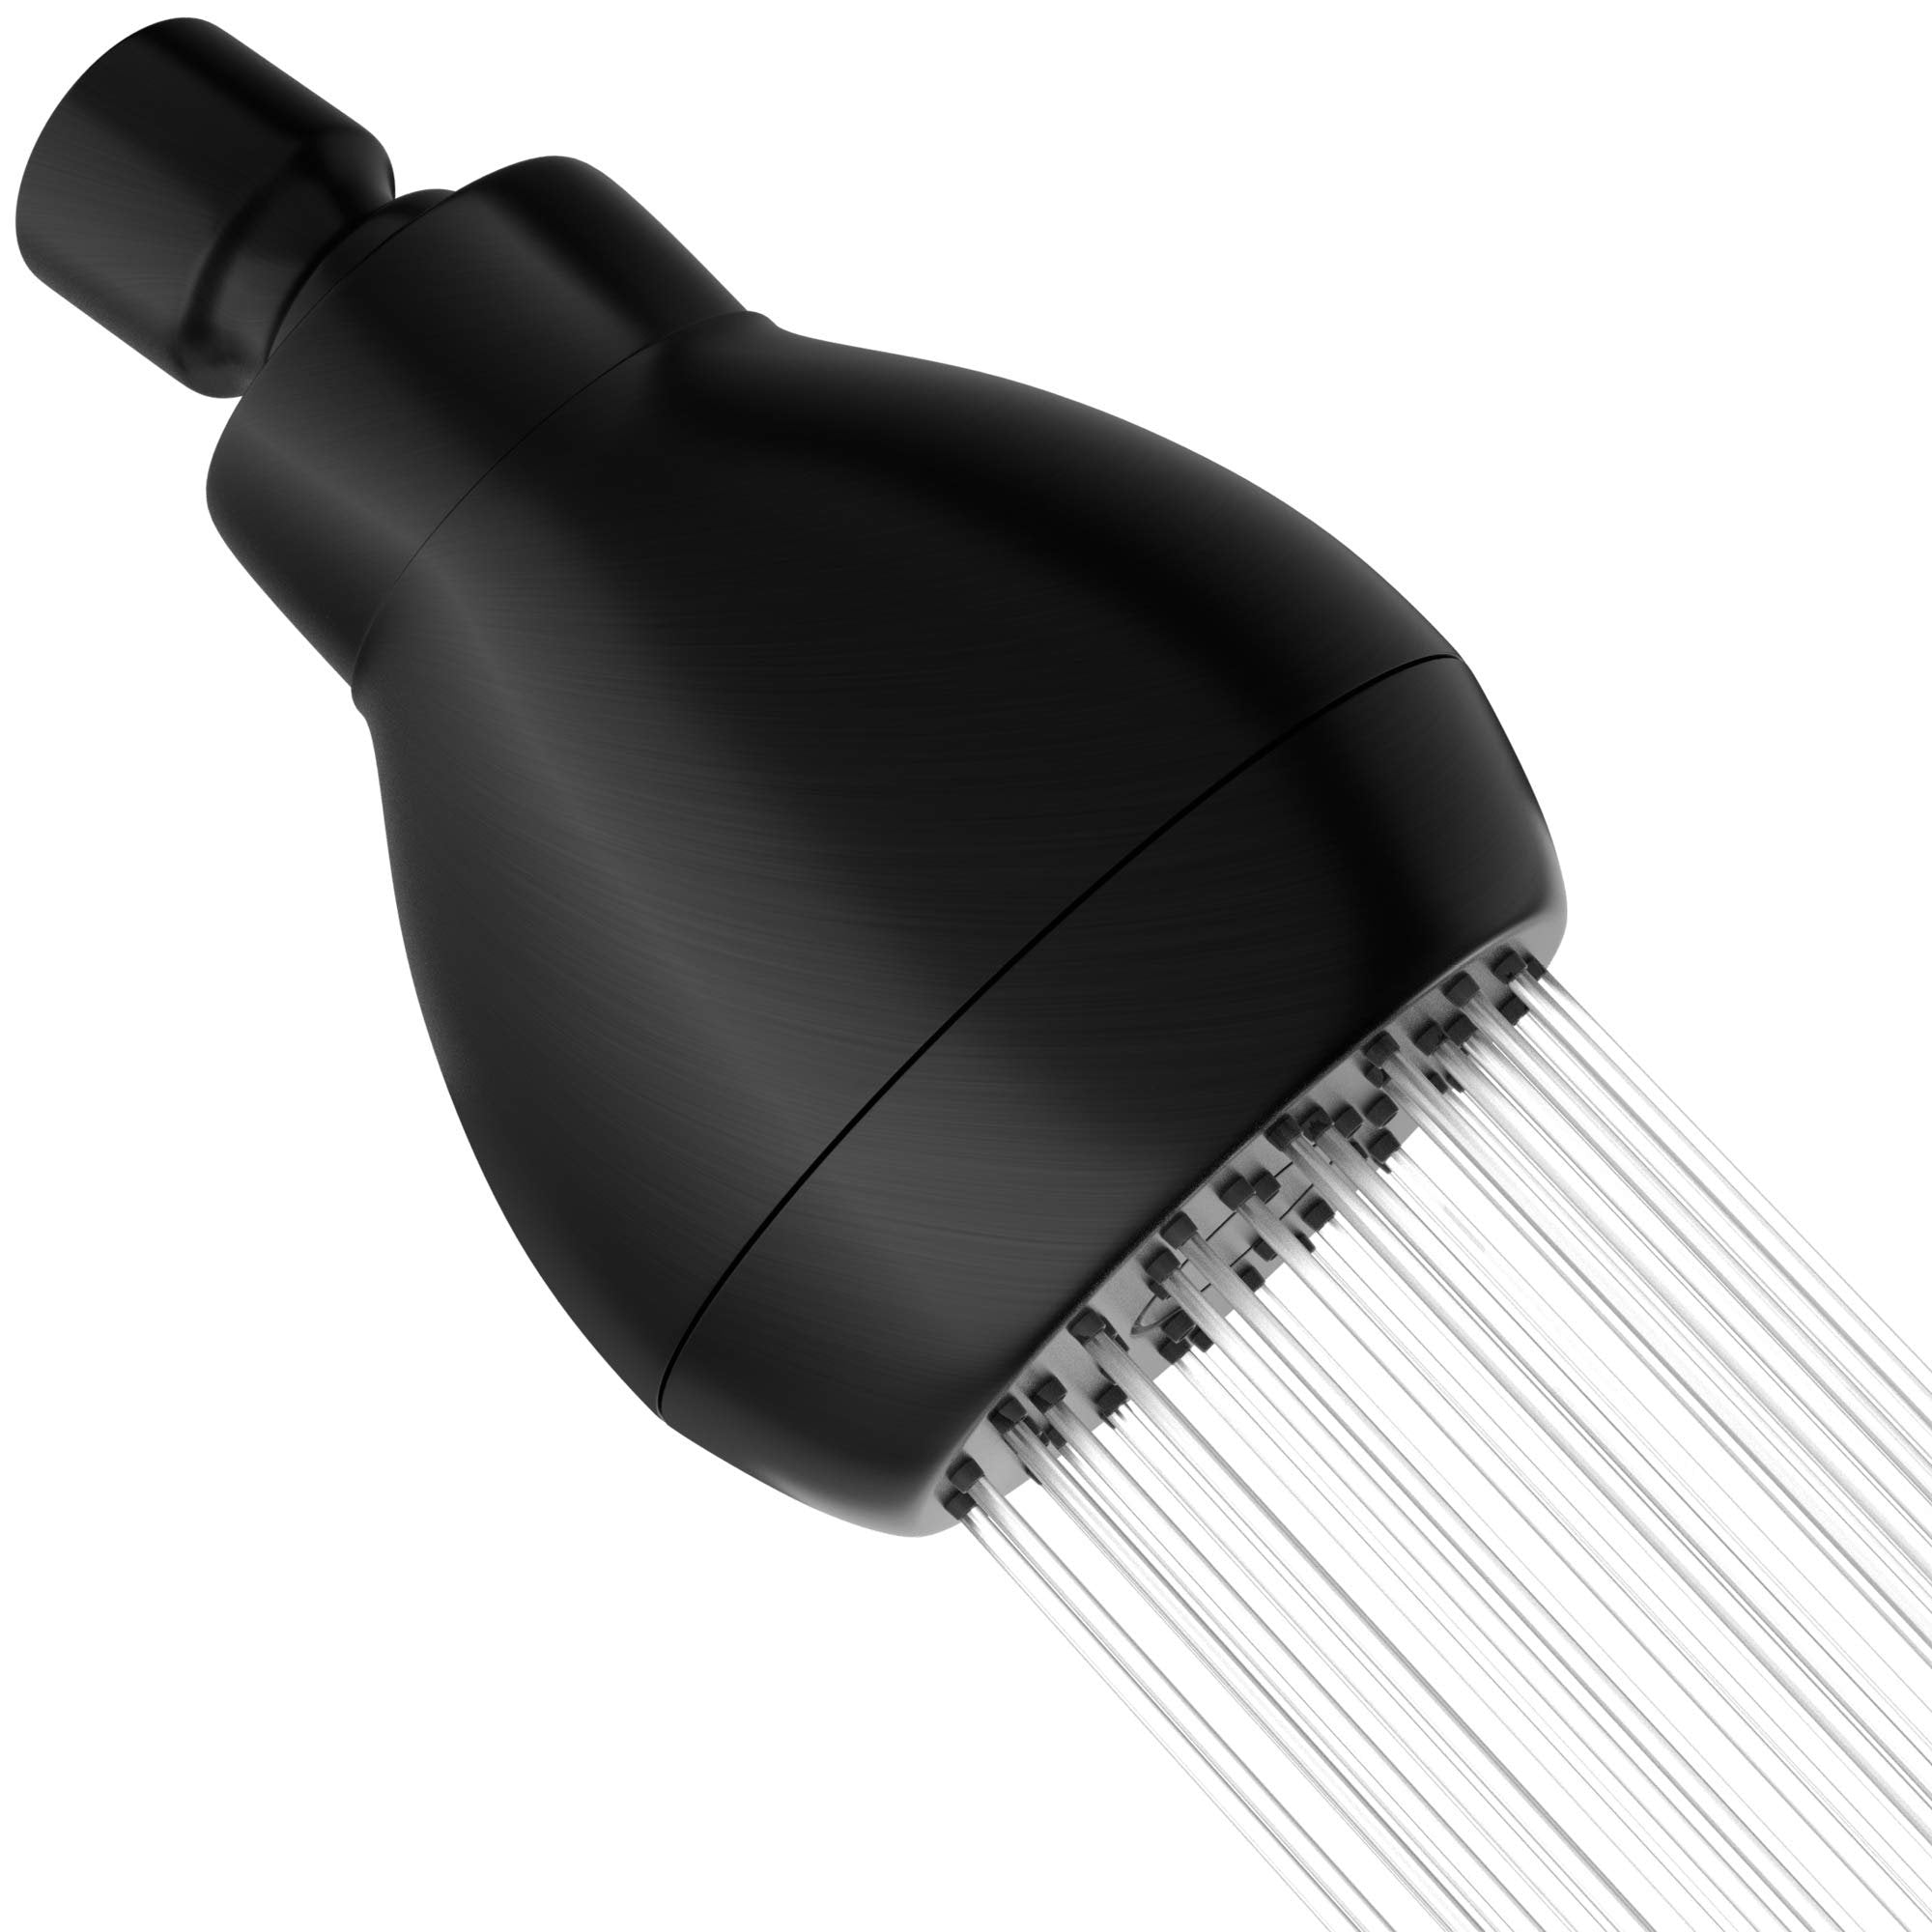 Matte Black High Pressure Shower Head - Strong Spray with Small Silicone Nozzles - 2.5 GPM Size - Universal Fit